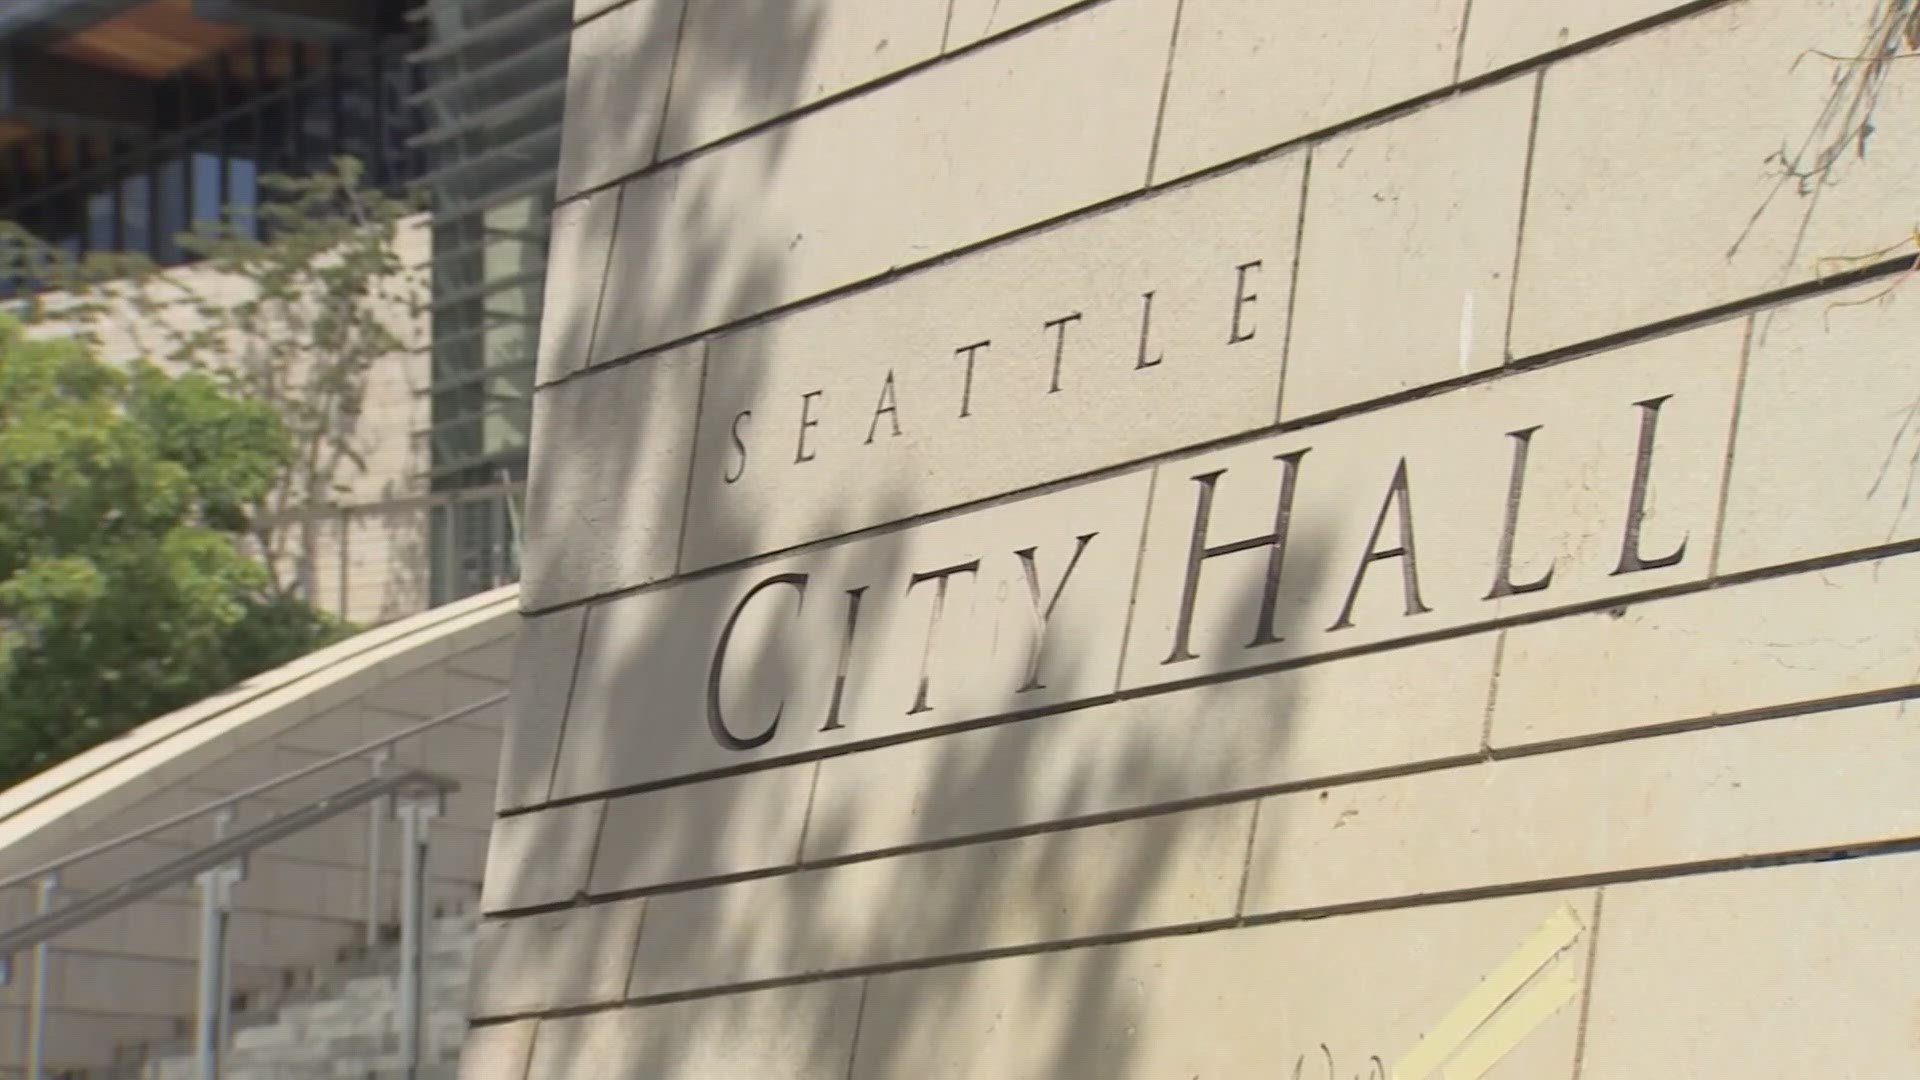 One of the top issues facing Seattle City Council this year is the looming budget deficit. Next week, they'll be asked to approve pay raises that would increase it.